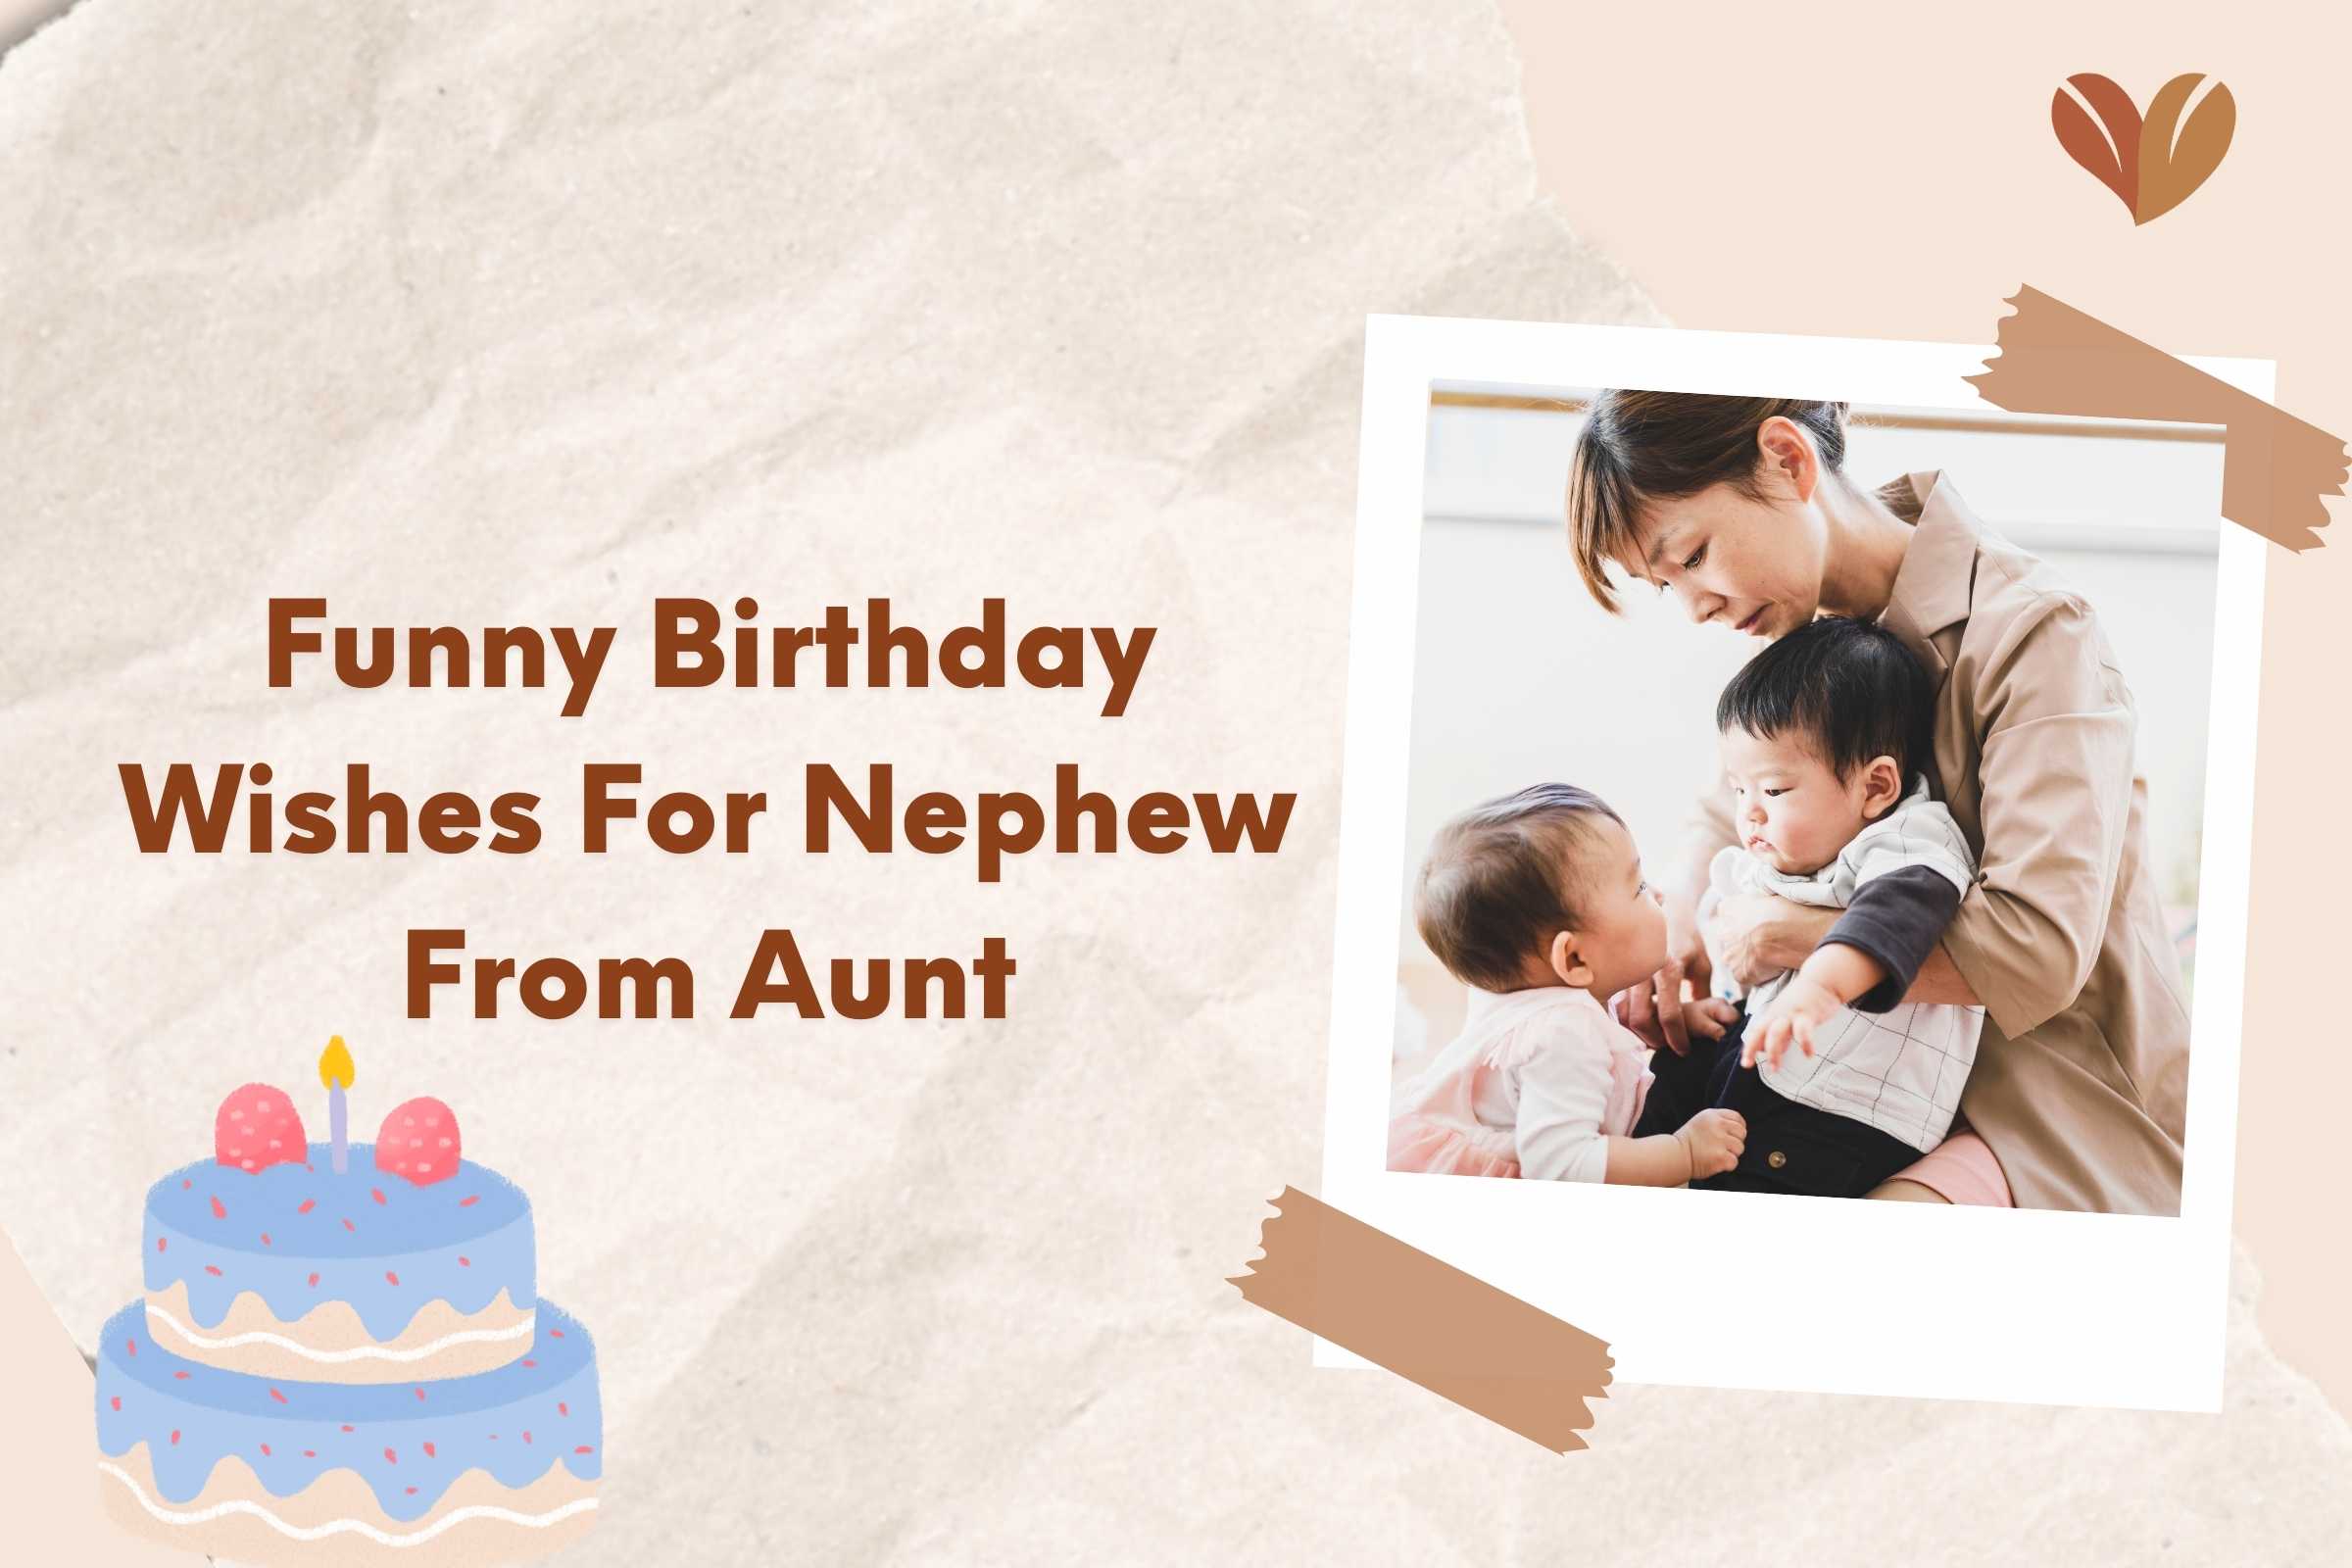 Celebrating with love: a collection of heartfelt birthday wishes for a nephew from aunt